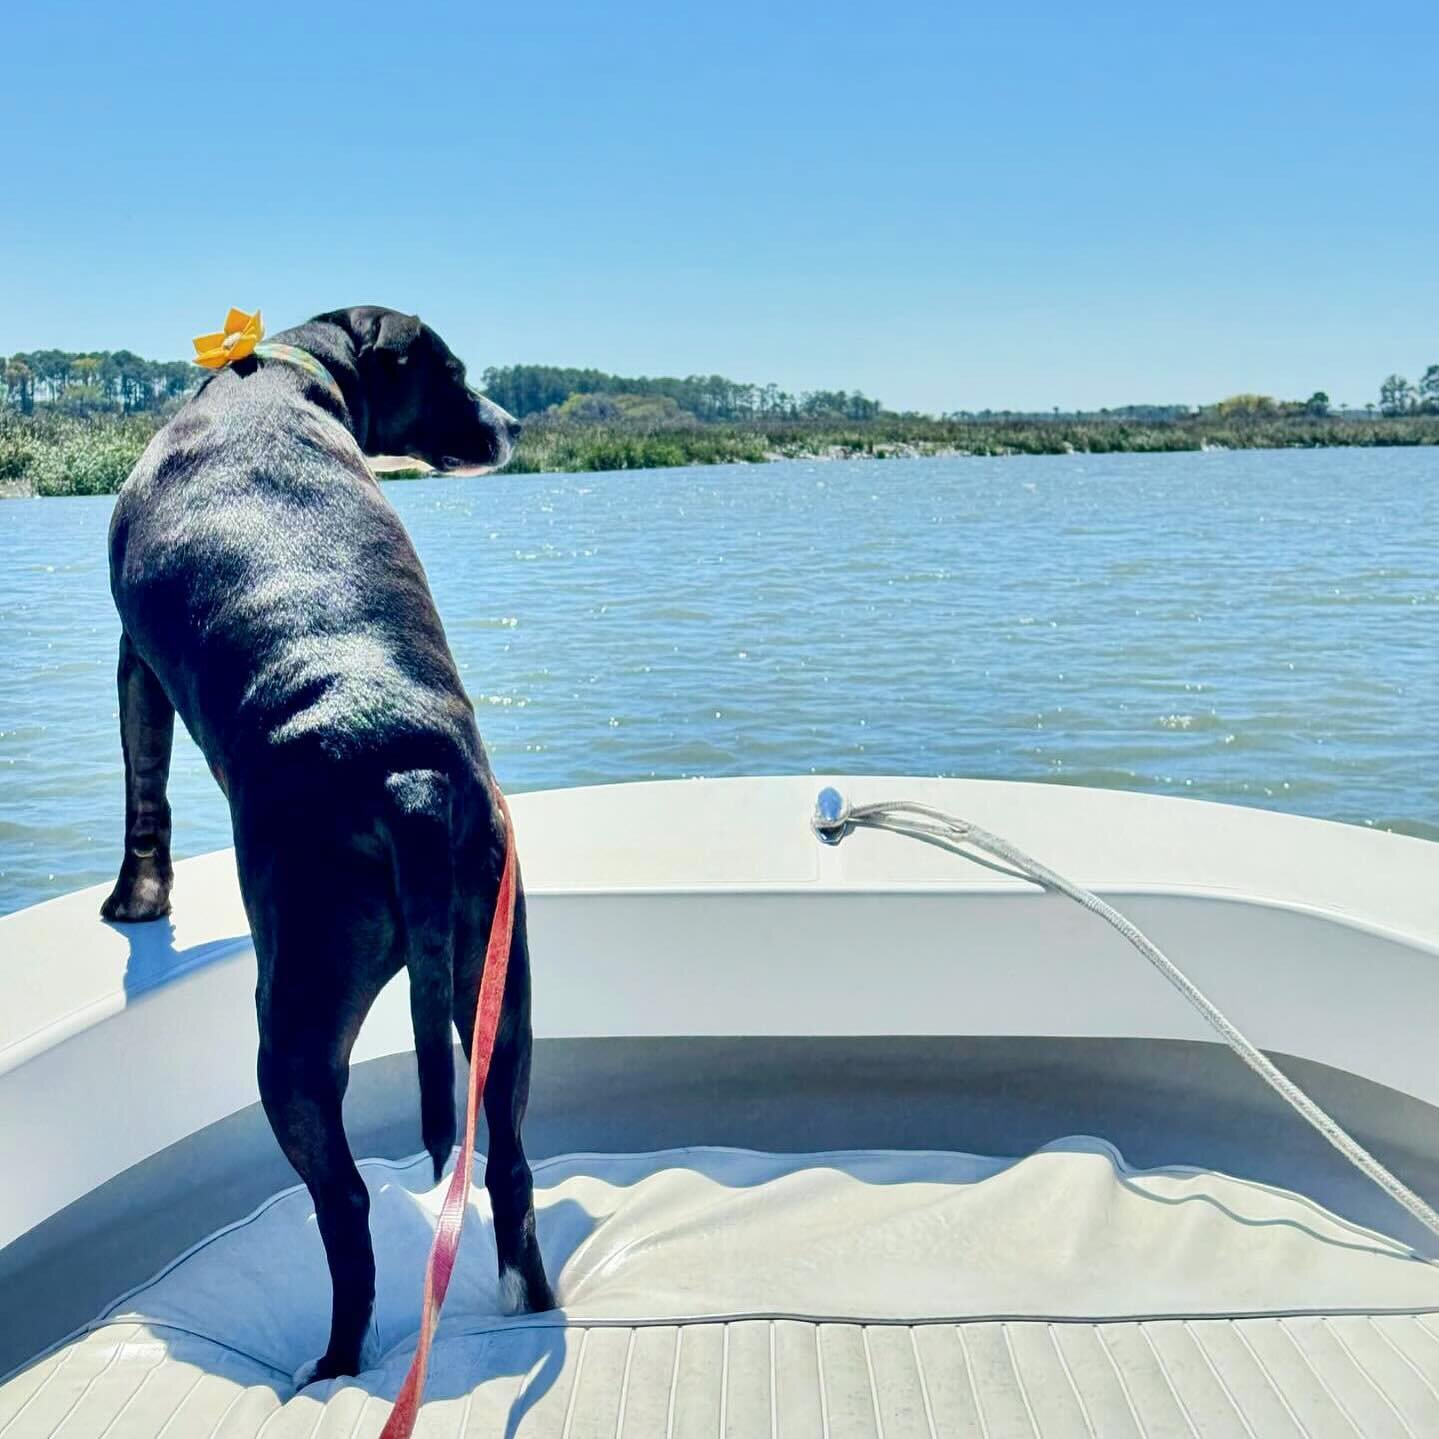 Did you know our trips can be dog friendly? 🐶 

We understand while traveling with our 4 legged friends, it can be hard to leave them for extended periods of time. We allow up to 2 well-behaved  dogs per trip upon owner discretion (you obviously kno